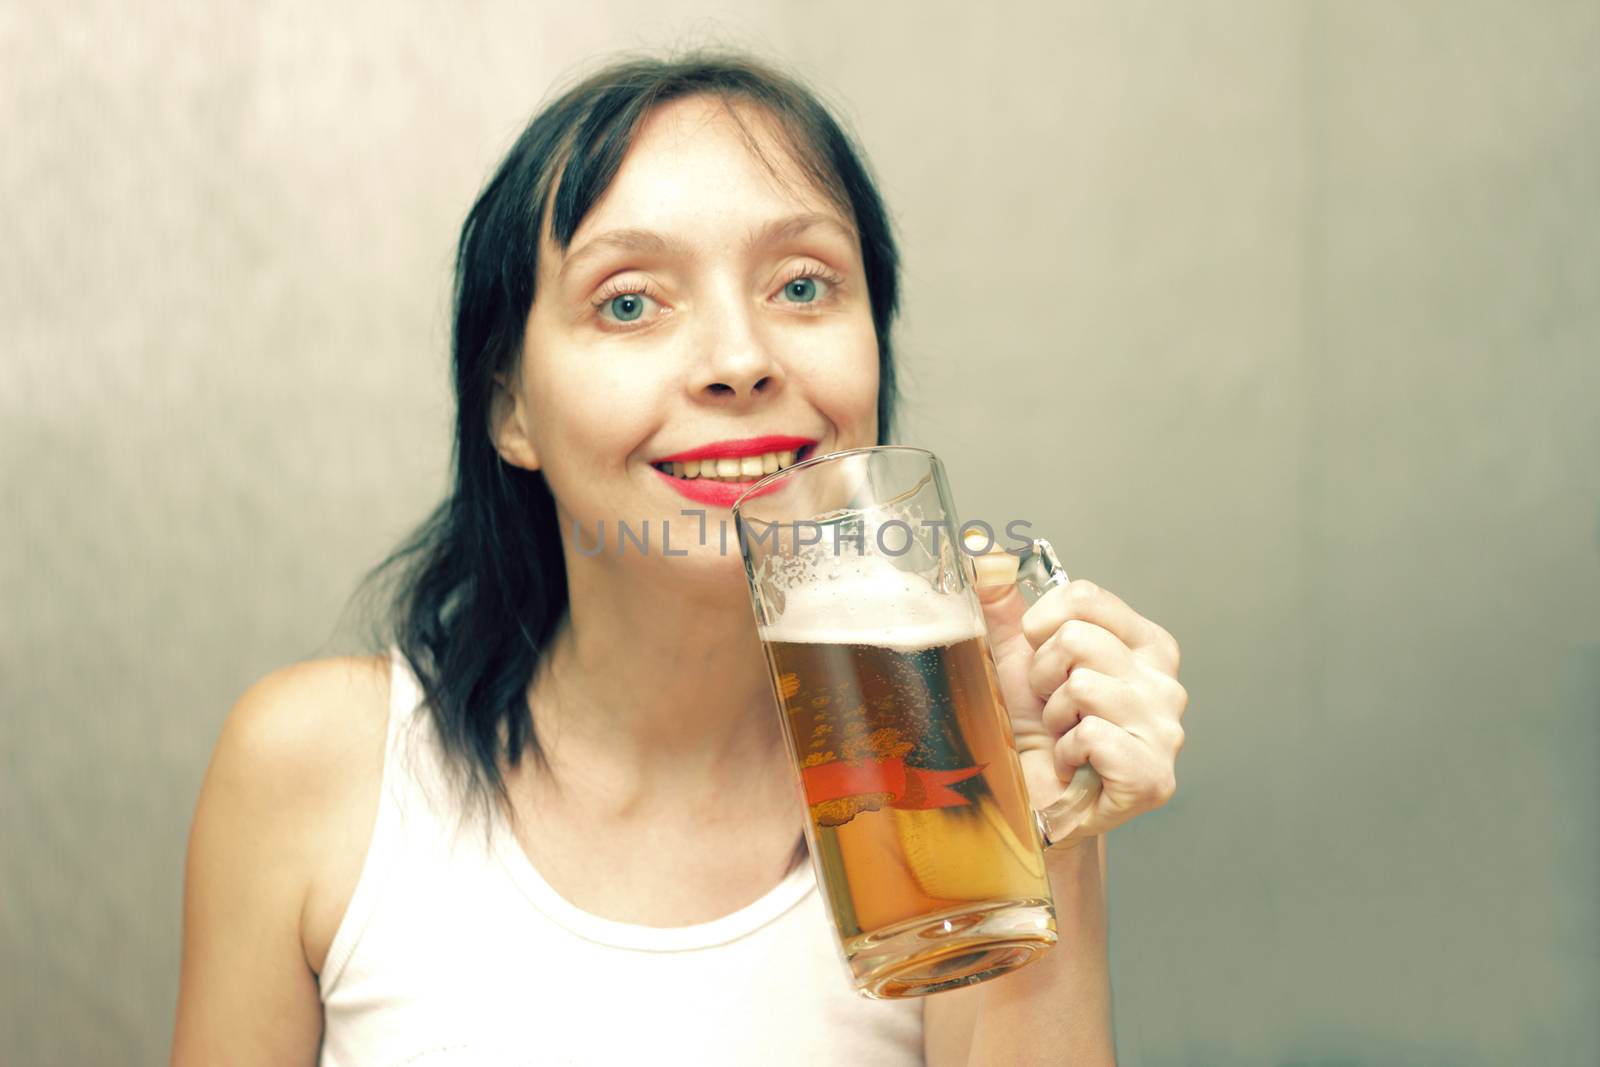 A beautiful woman is drinking beer from a glass beer mug.